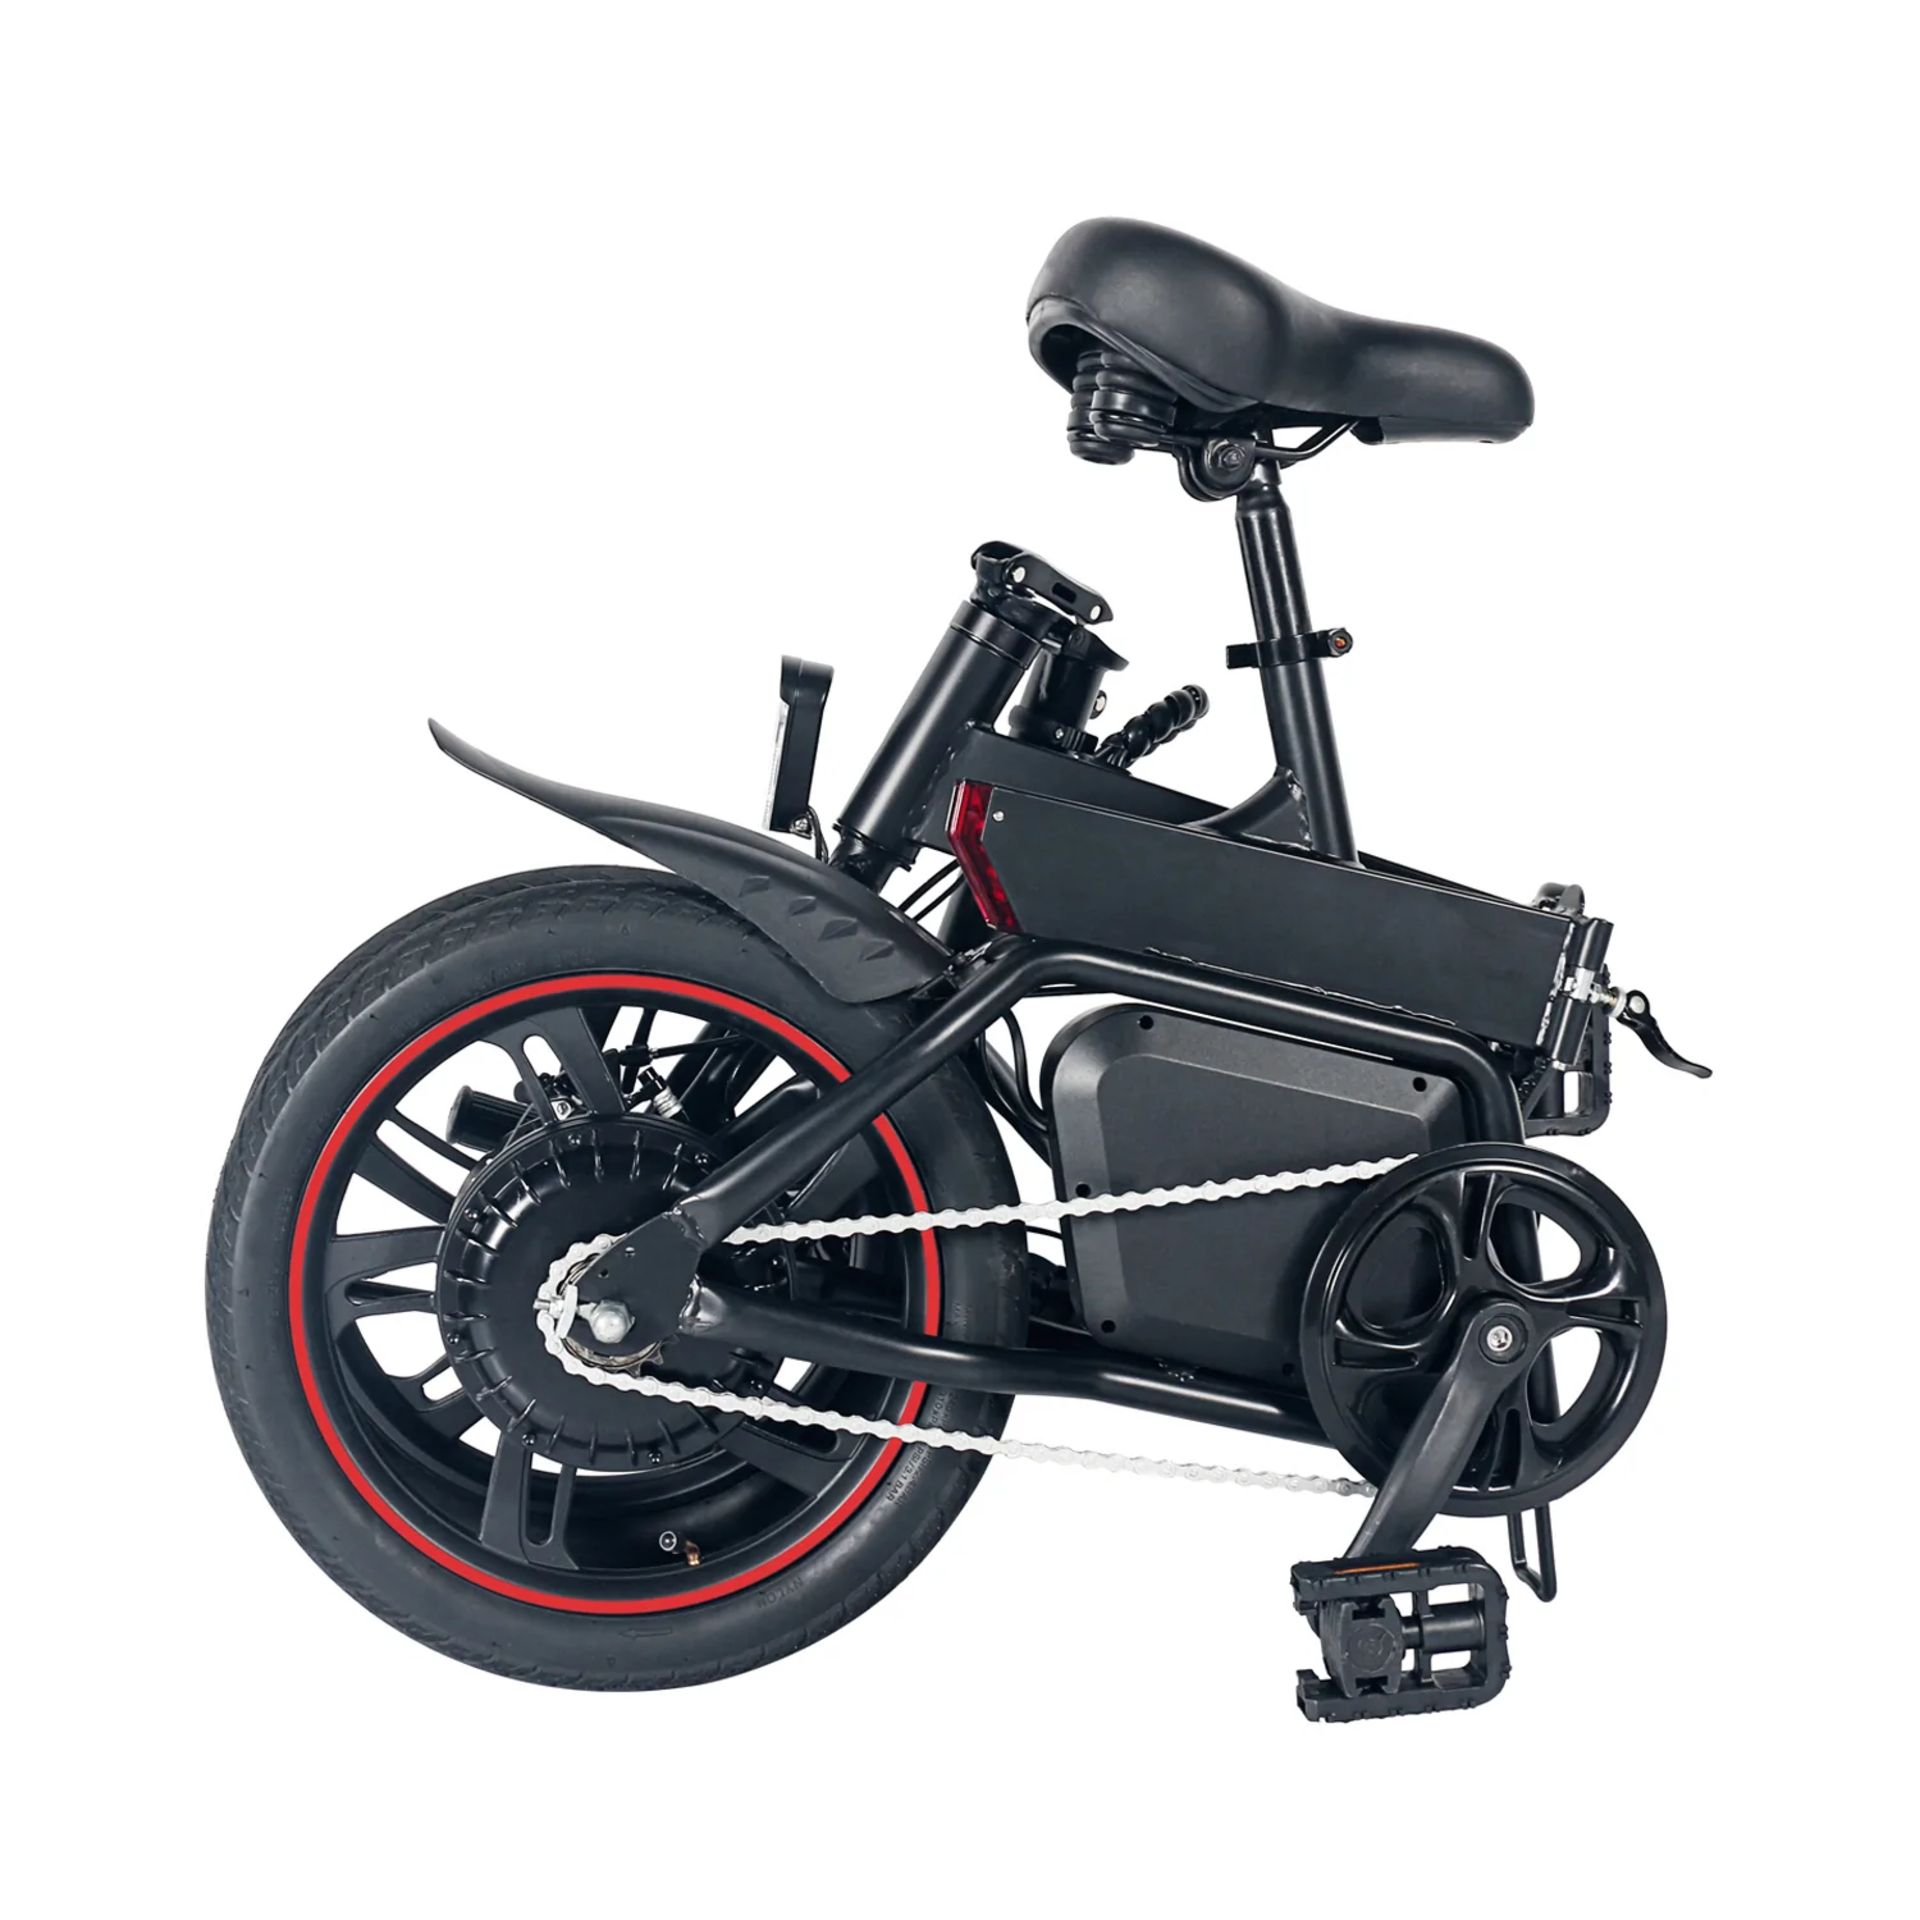 Windgoo B20 Pro Electric Bike. RRP £1,100.99. With 16-inch-wide tires and a frame of upgraded - Bild 6 aus 7